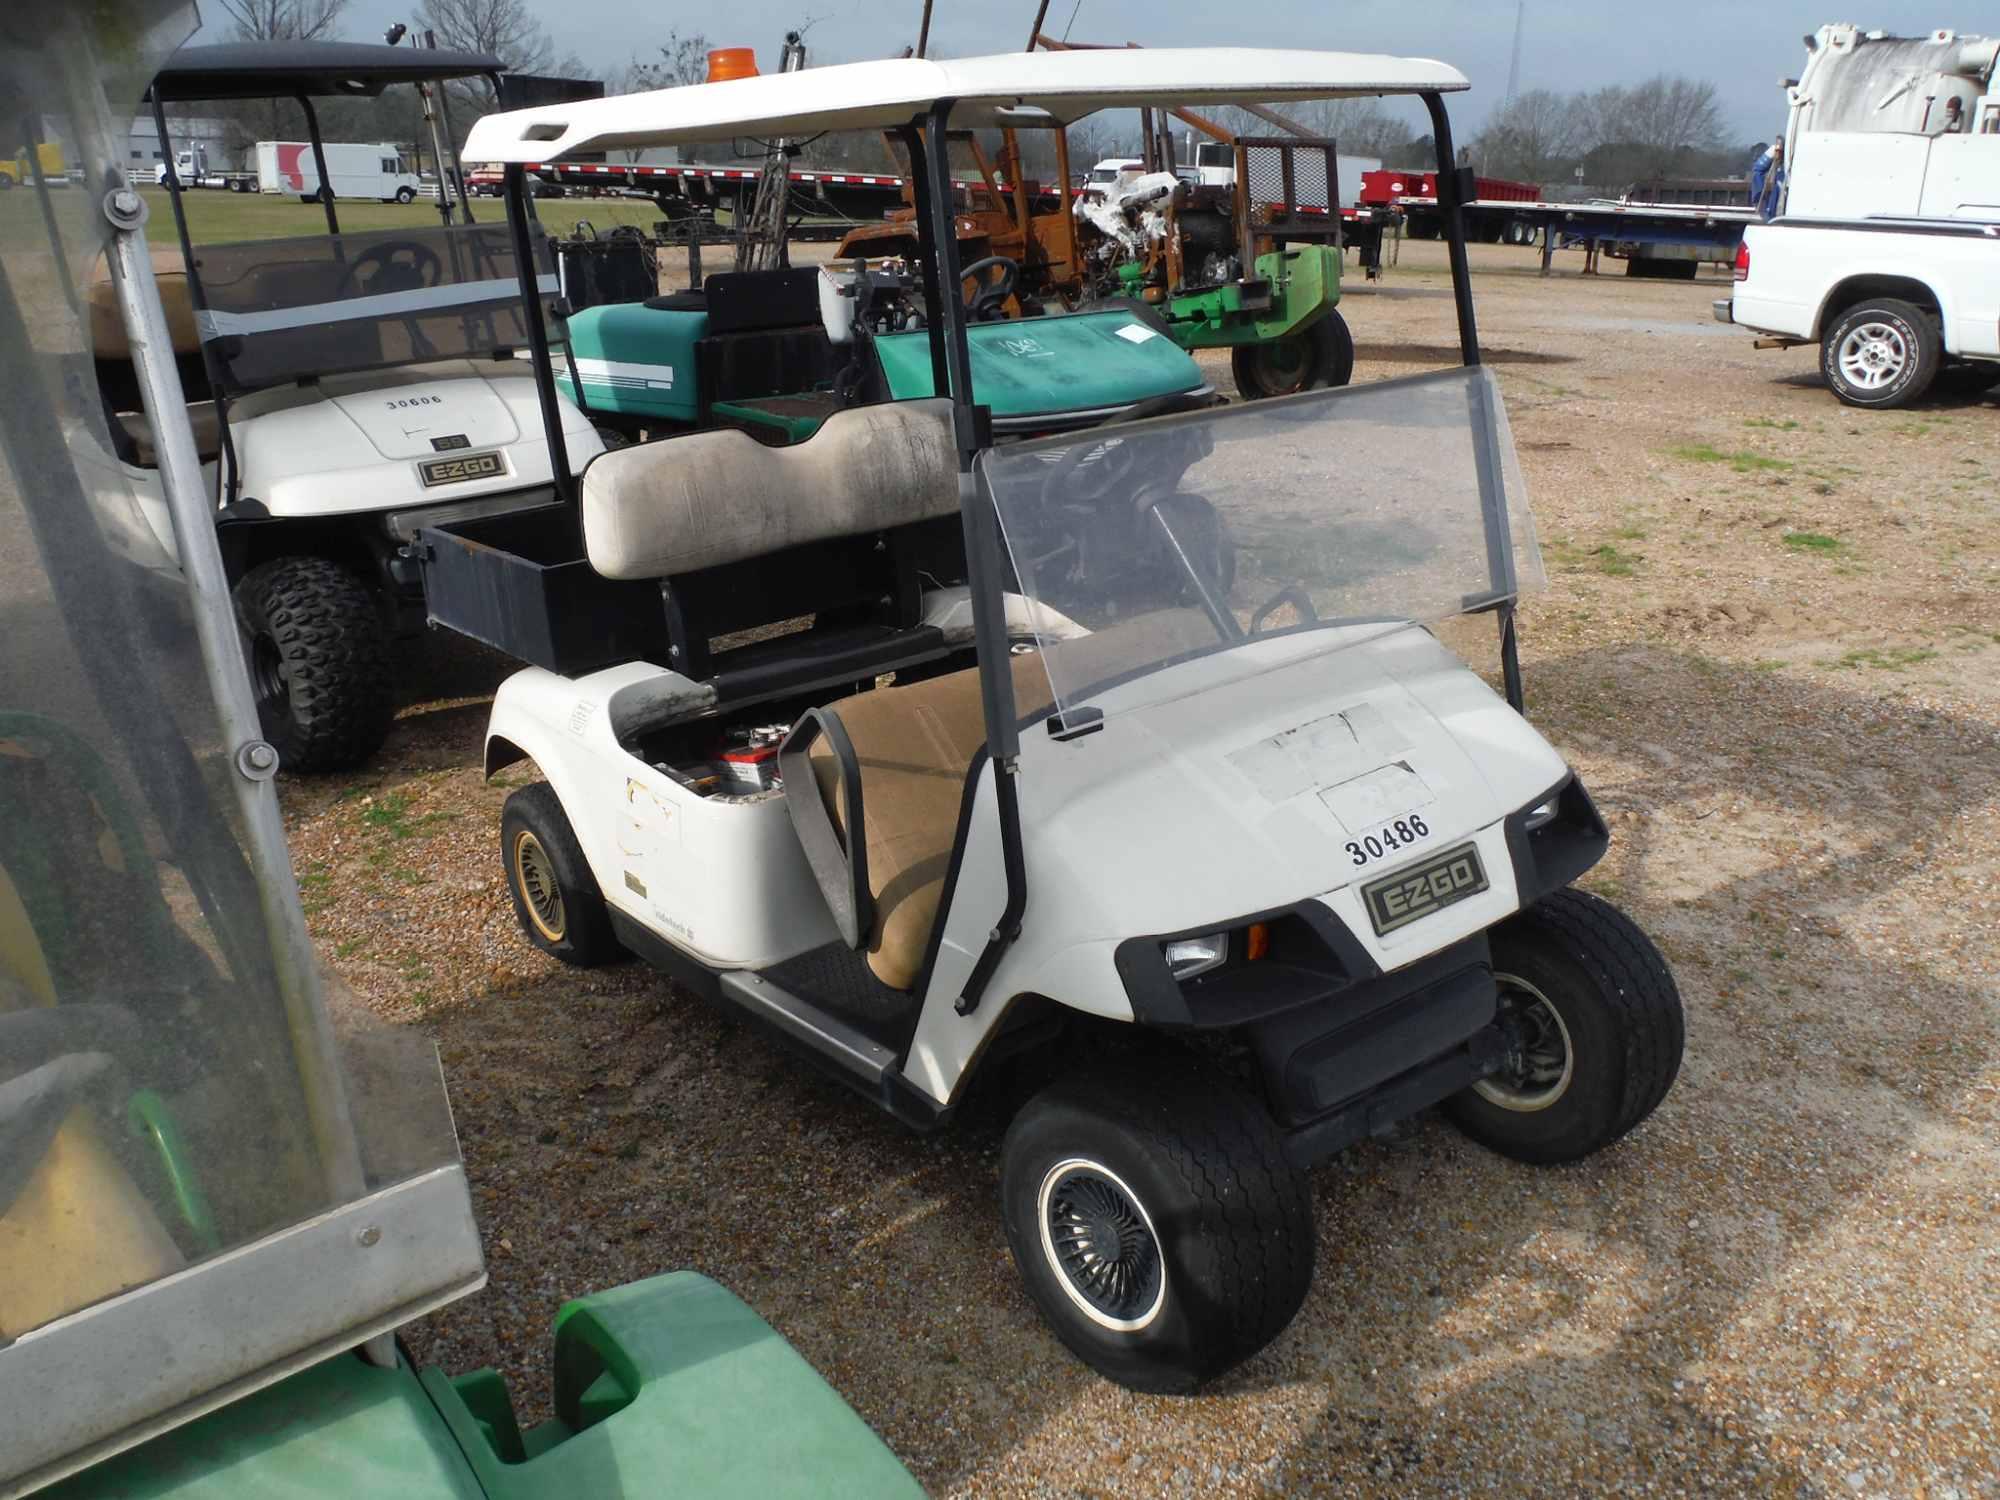 EZGo Elextric Golf Cart, s/n 2423?? (No Title - Salvage): No Charger (Owned